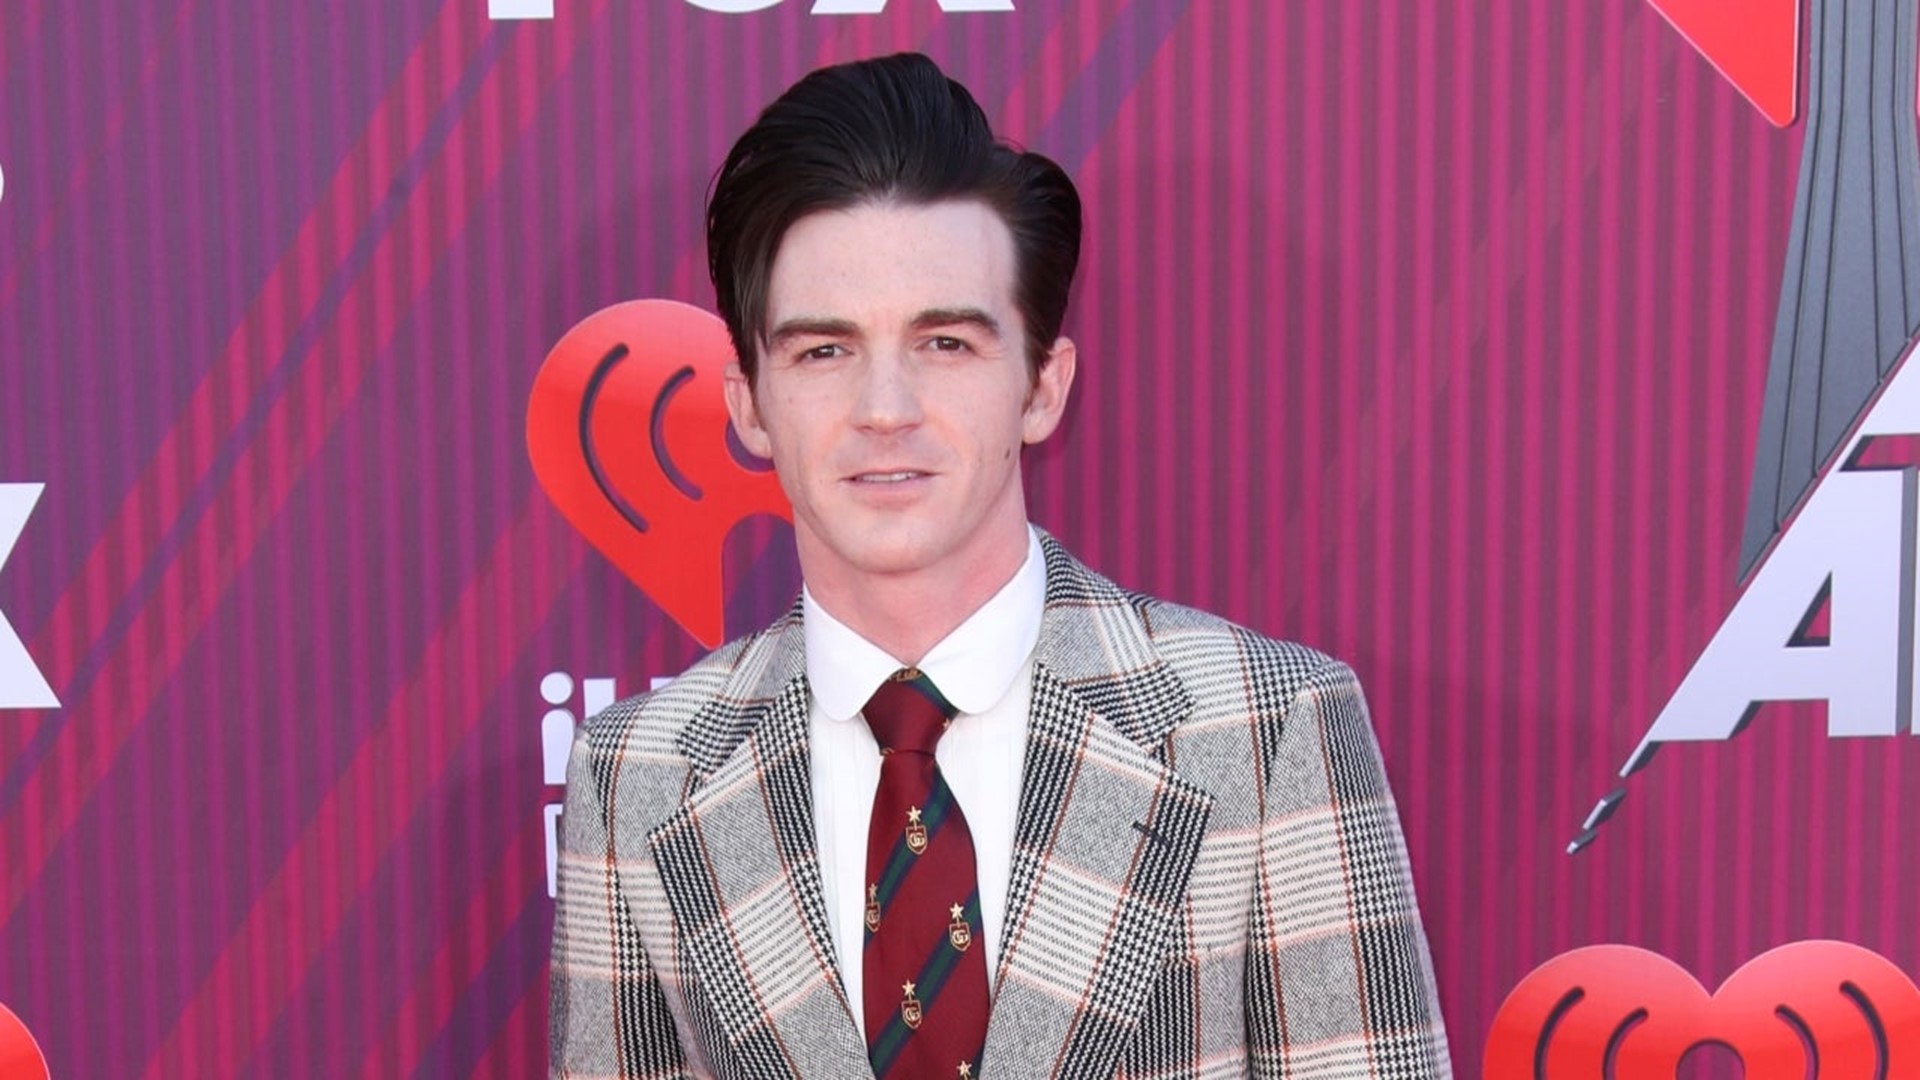 Drake Bell Pleads Guilty to Criminal Charges Involving a Minor | kare11.com